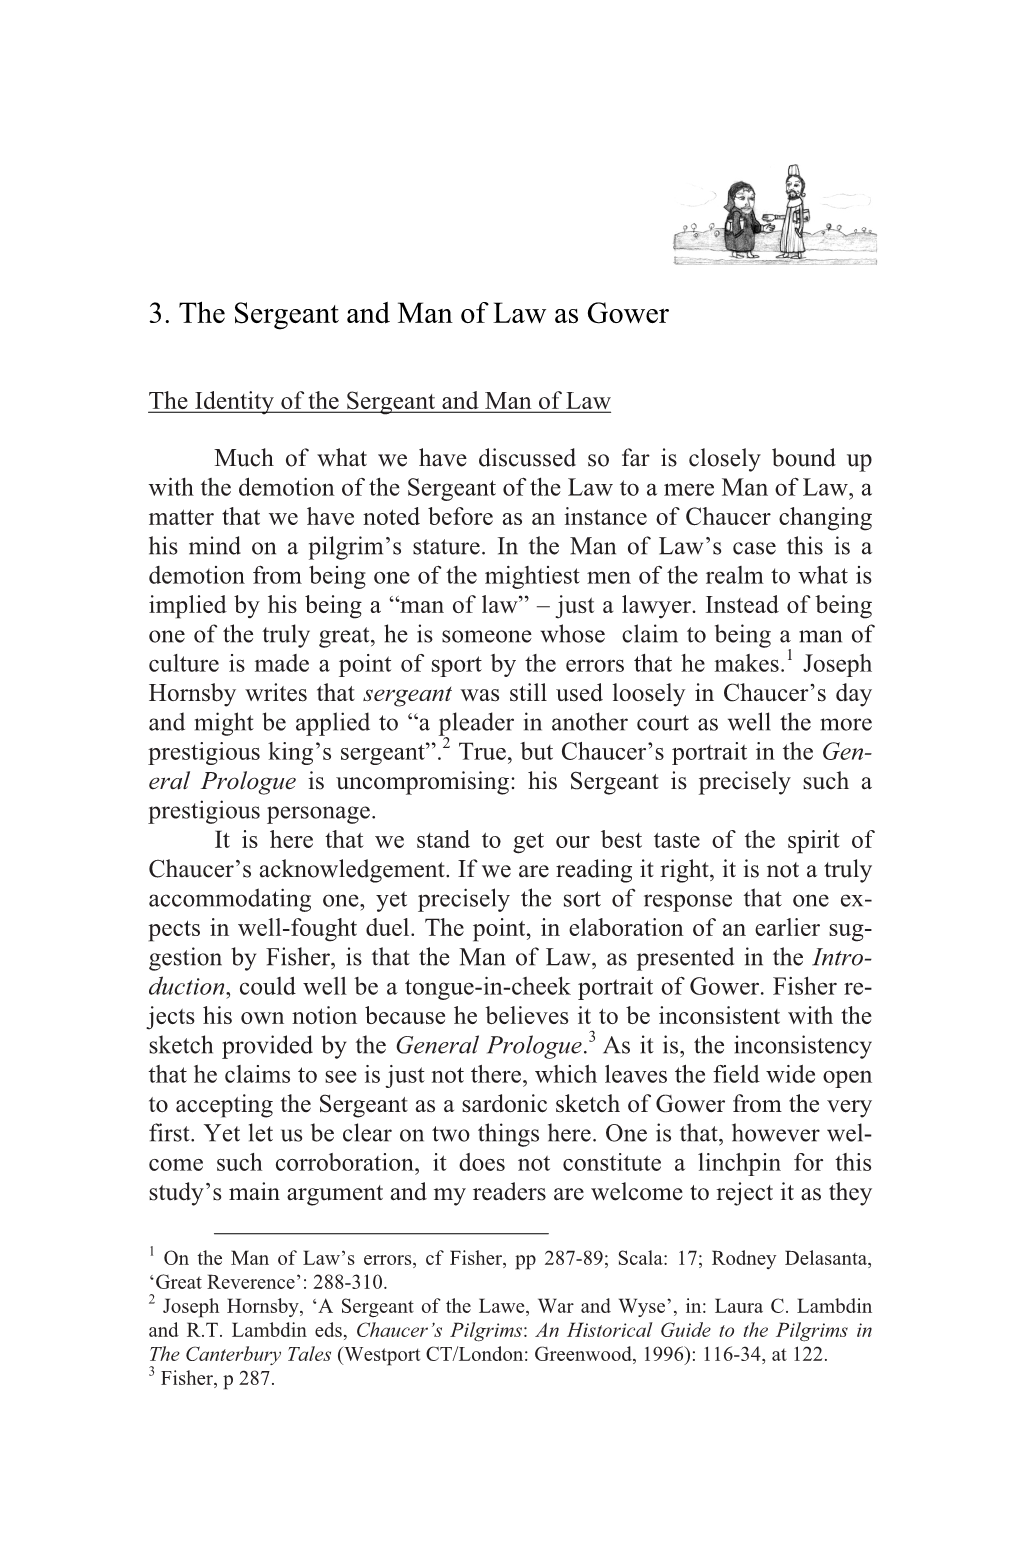 3. the Sergeant and Man of Law As Gower